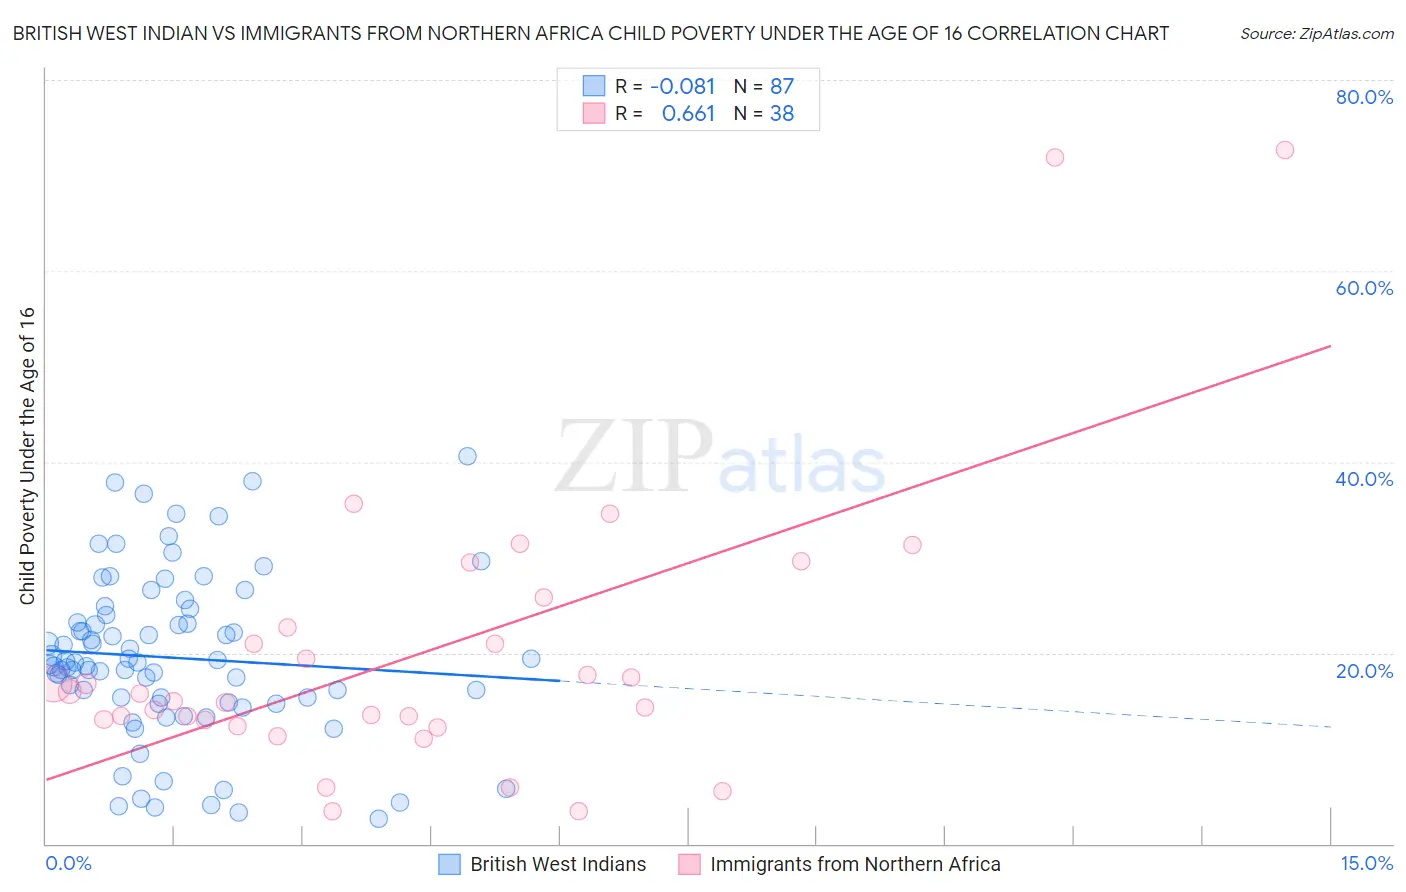 British West Indian vs Immigrants from Northern Africa Child Poverty Under the Age of 16